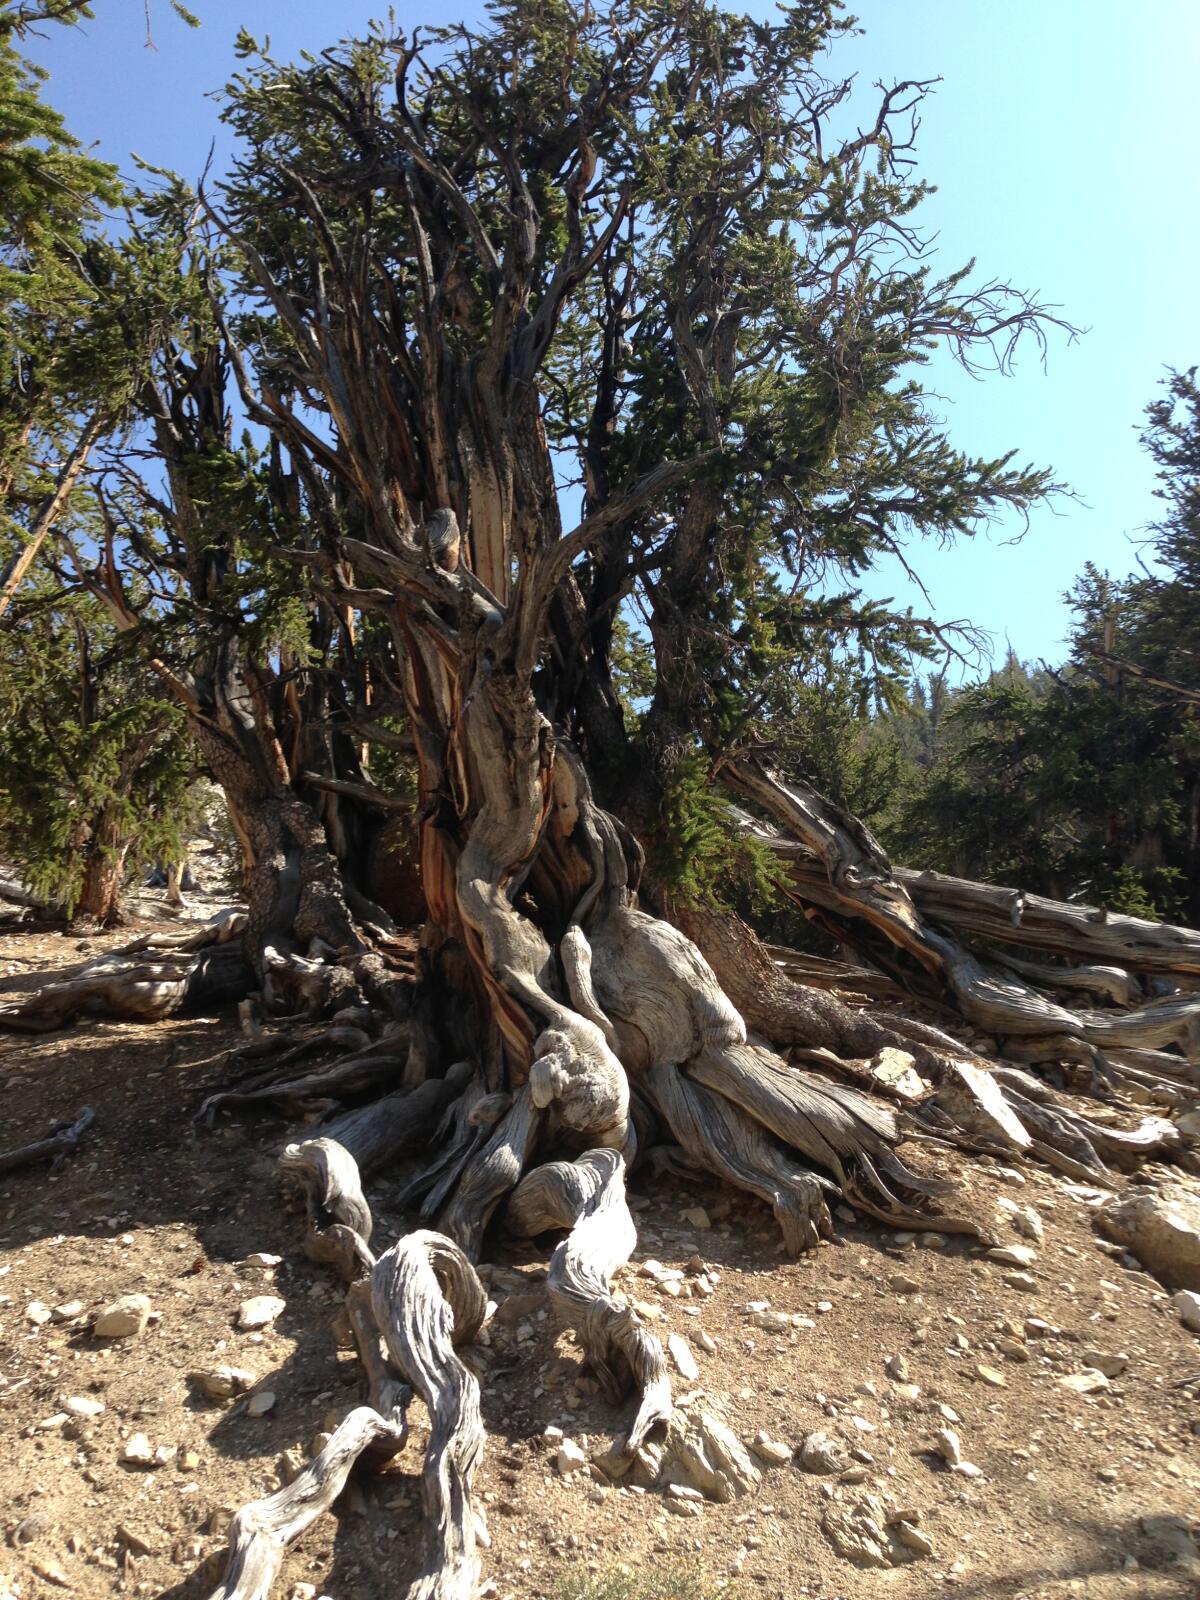 A bristlecone pine tree in the Inyo National Forest.